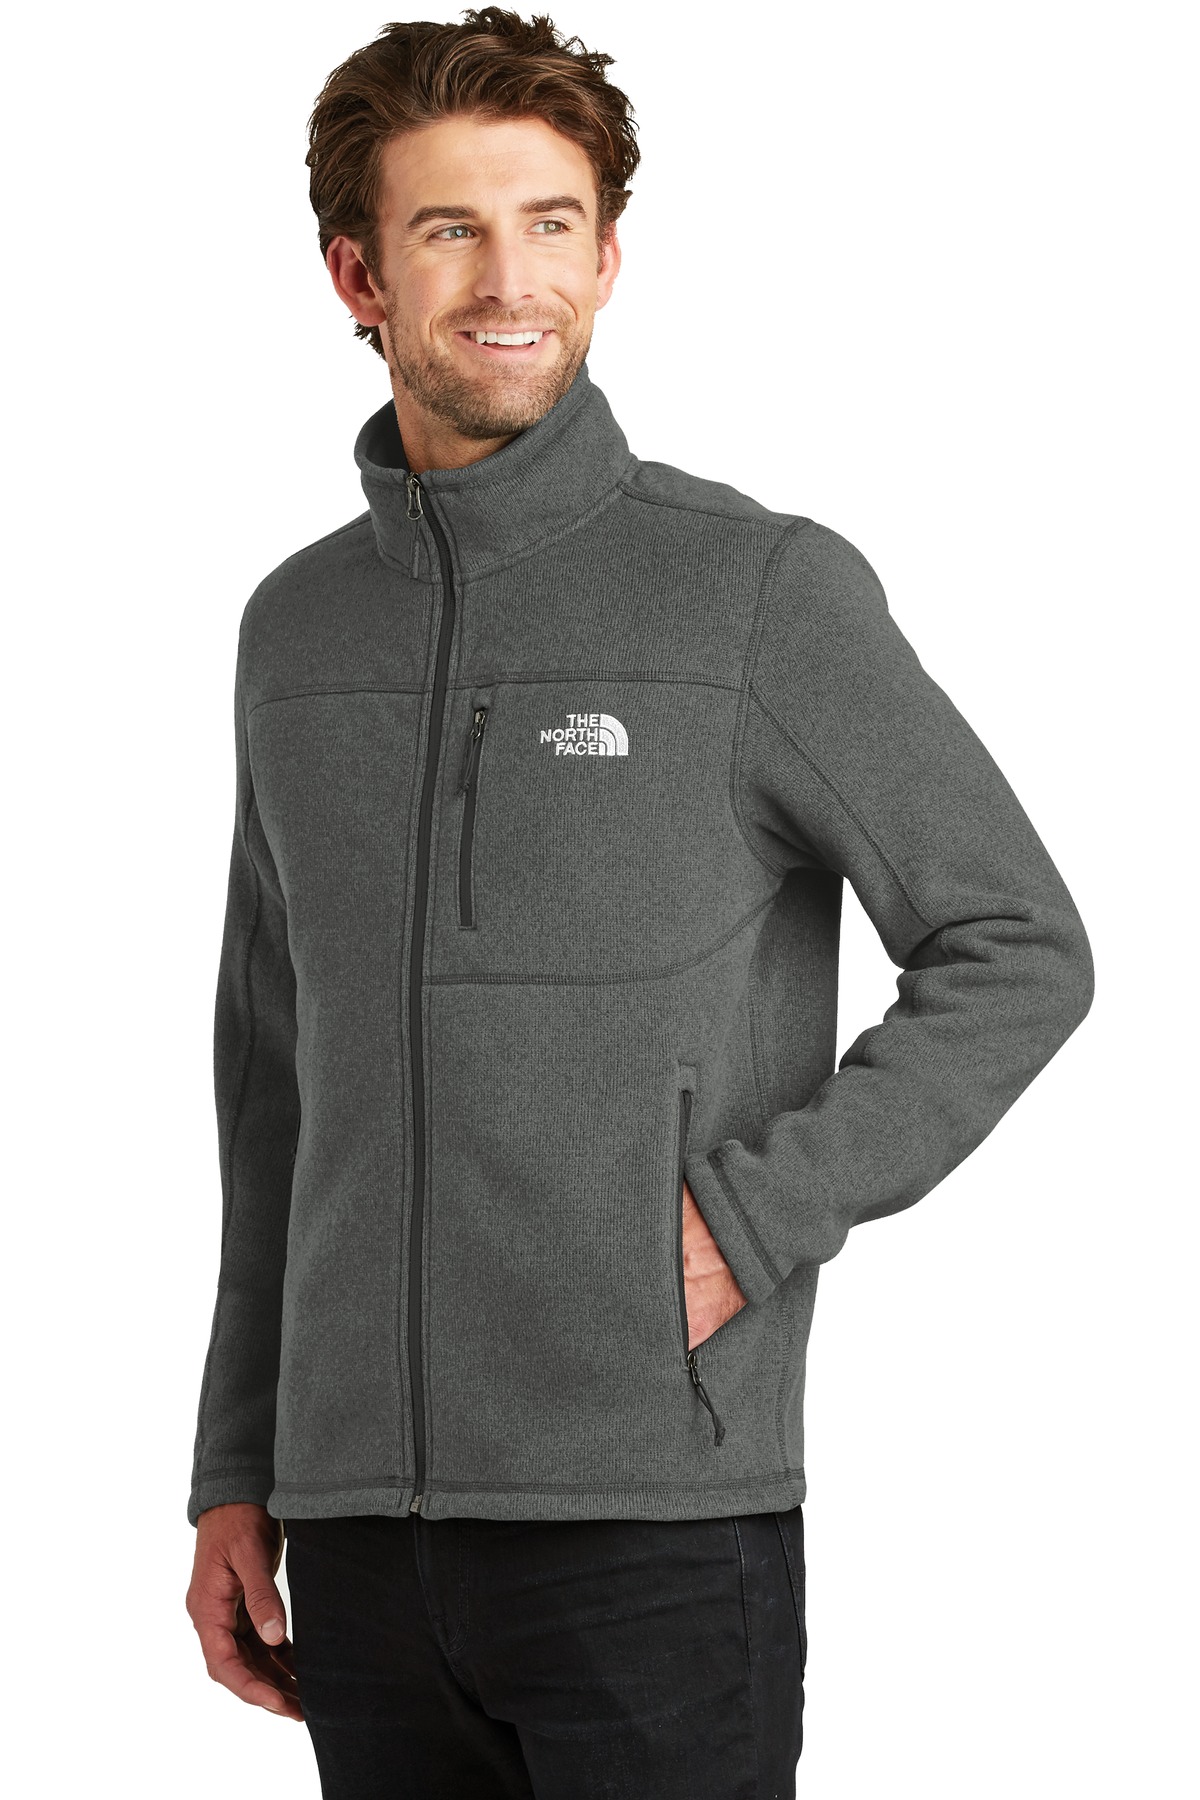 The North Face Sweater Fleece Jacket. NF0A3LH7 | Blank Apparel by ZOME